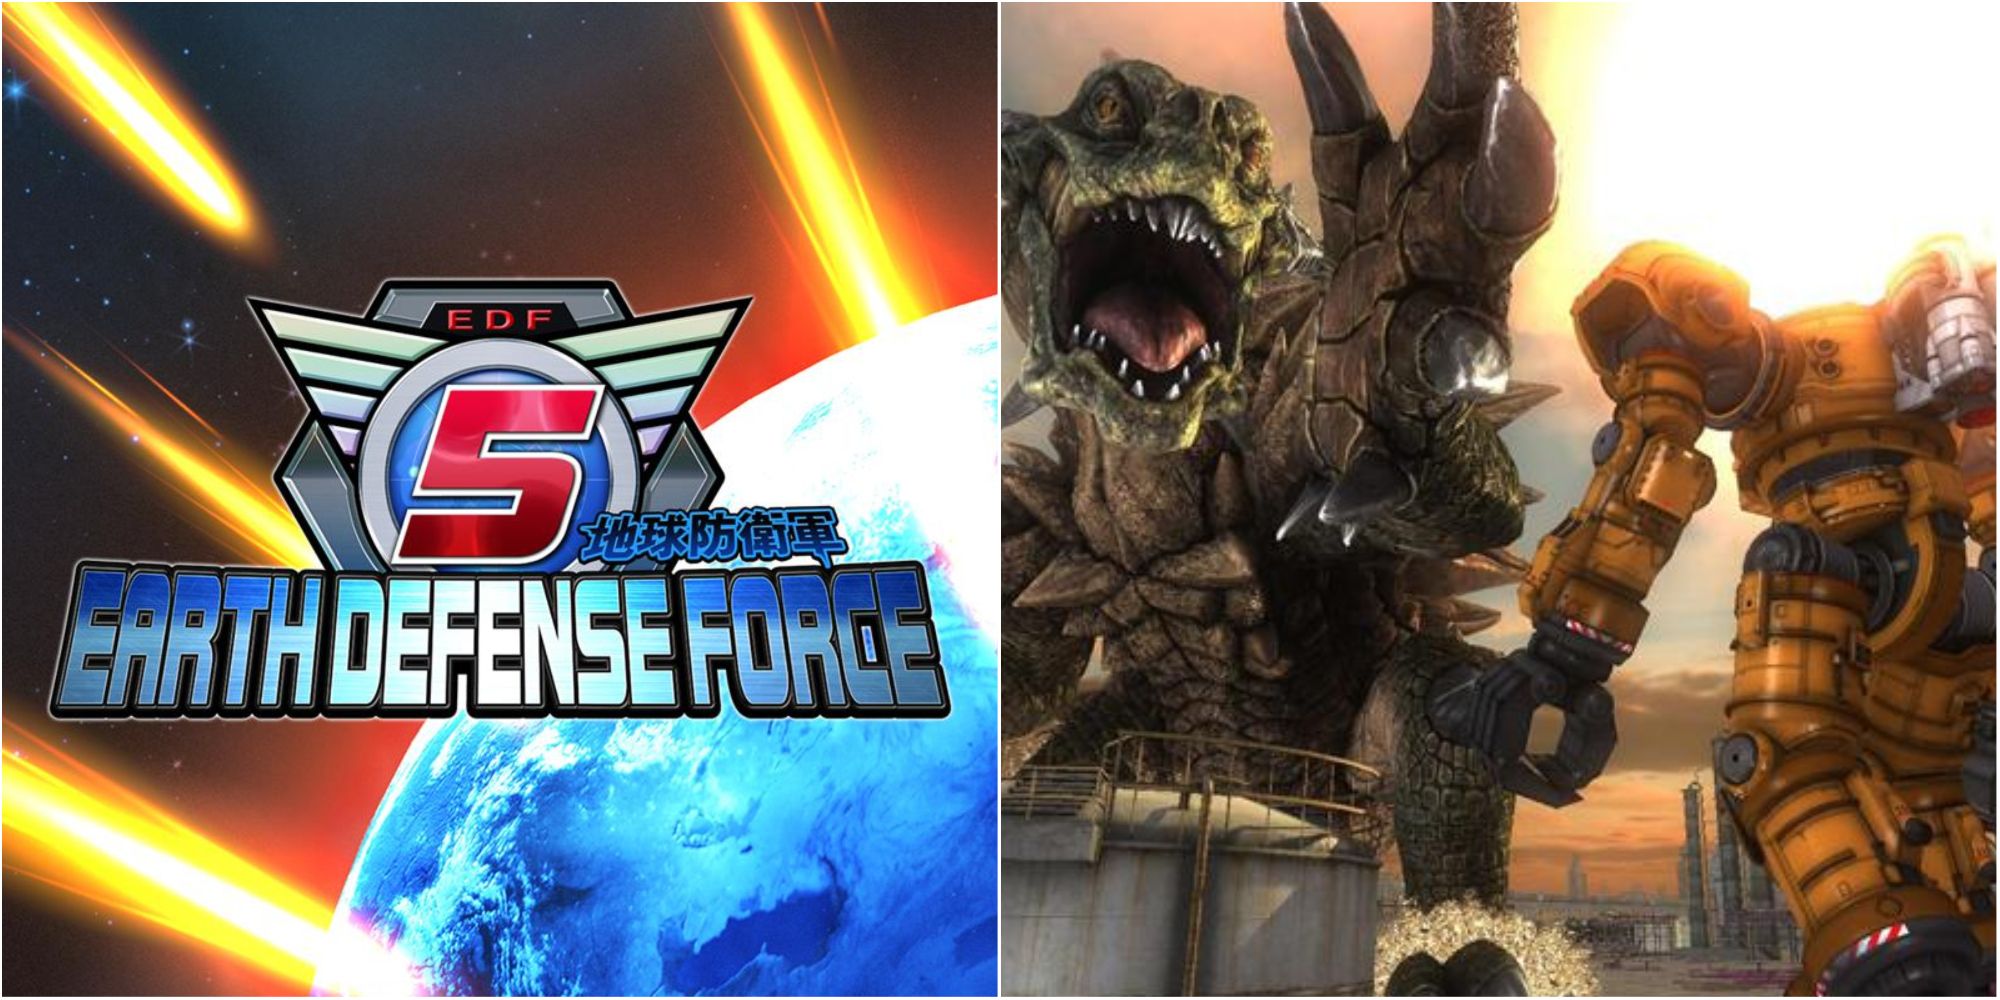 earth defese force 5 cover art and gameplay